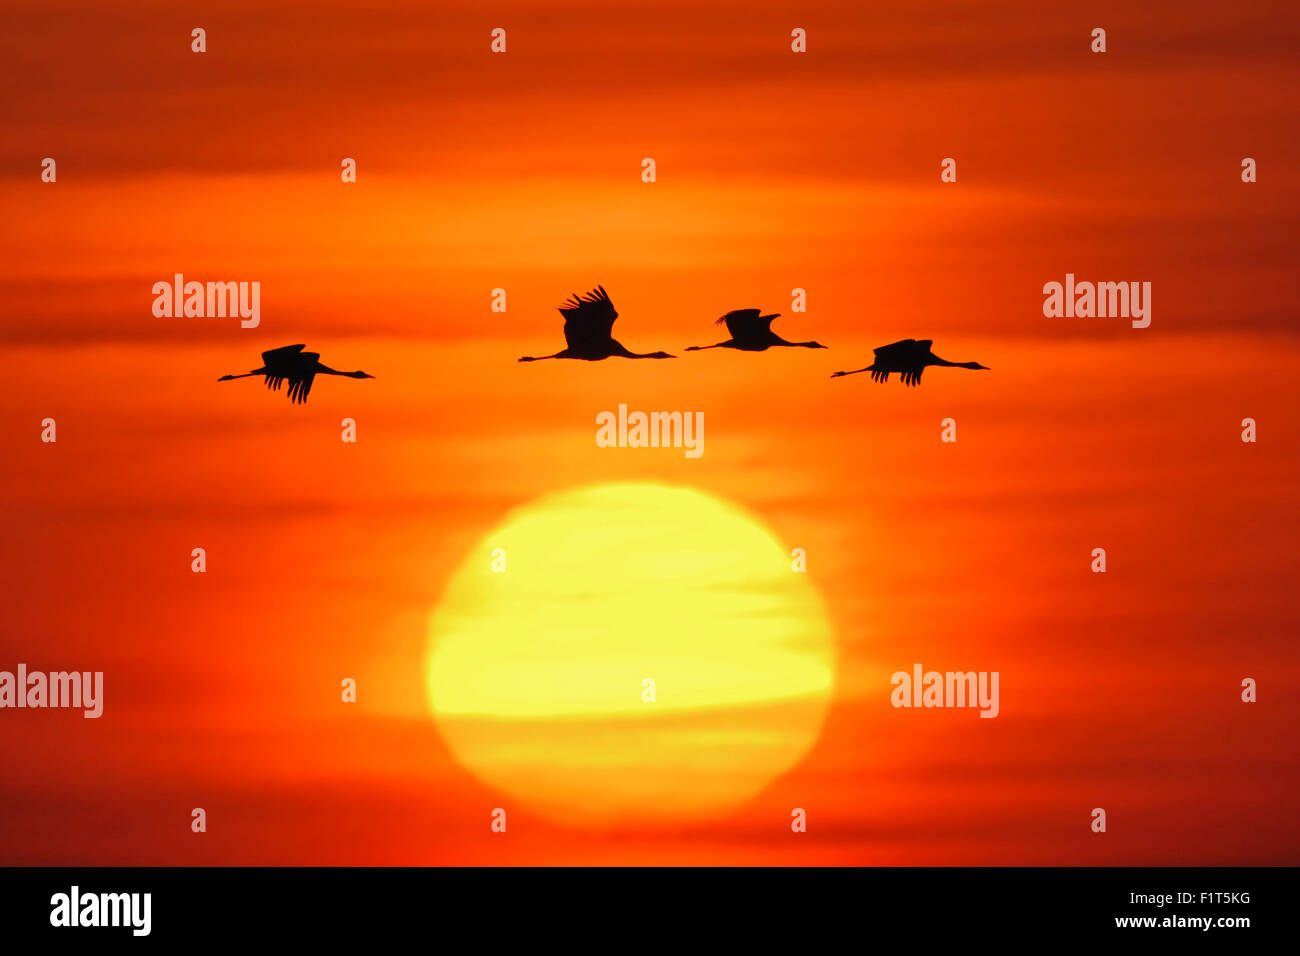 Silhouette of a flock of Common Cranes / Graue Kraniche ( Grus grus ) flying in front of a beautiful sunrise / red sky. Stock Photo